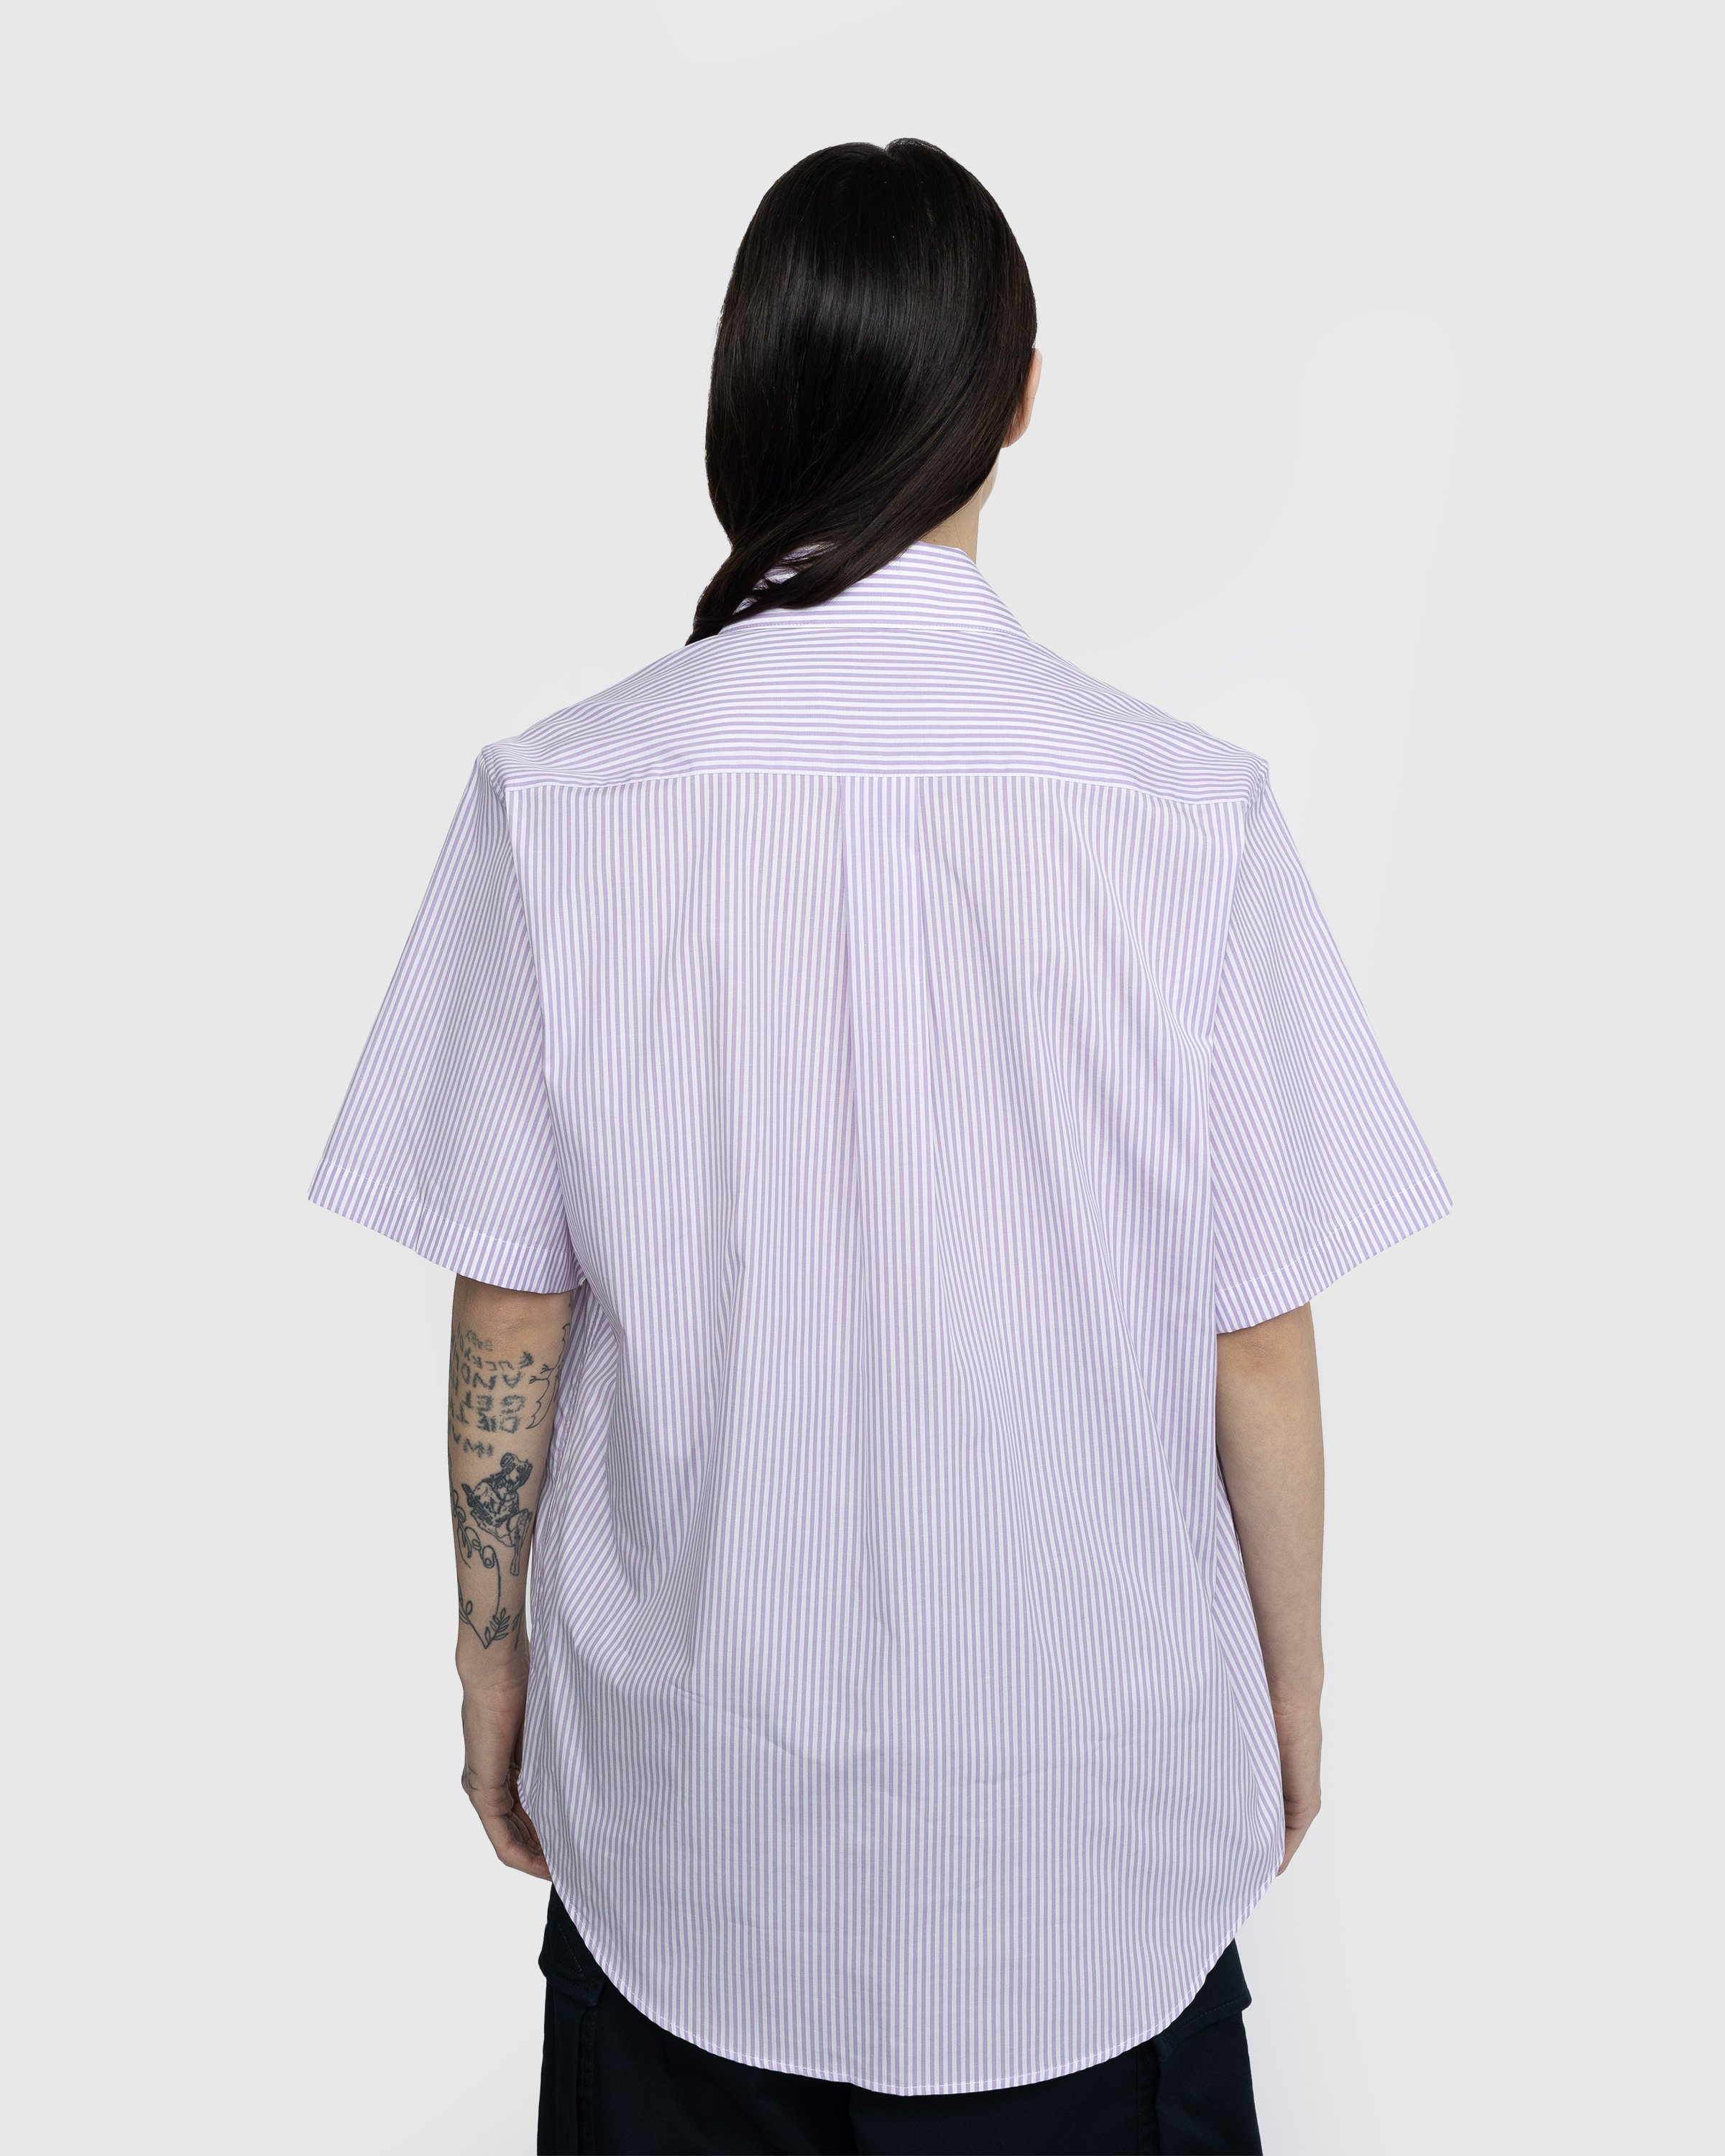 Martine Rose - Classic Short-Sleeve Button-Down Shirt Lilac and White Stripe - Clothing - Purple - Image 3